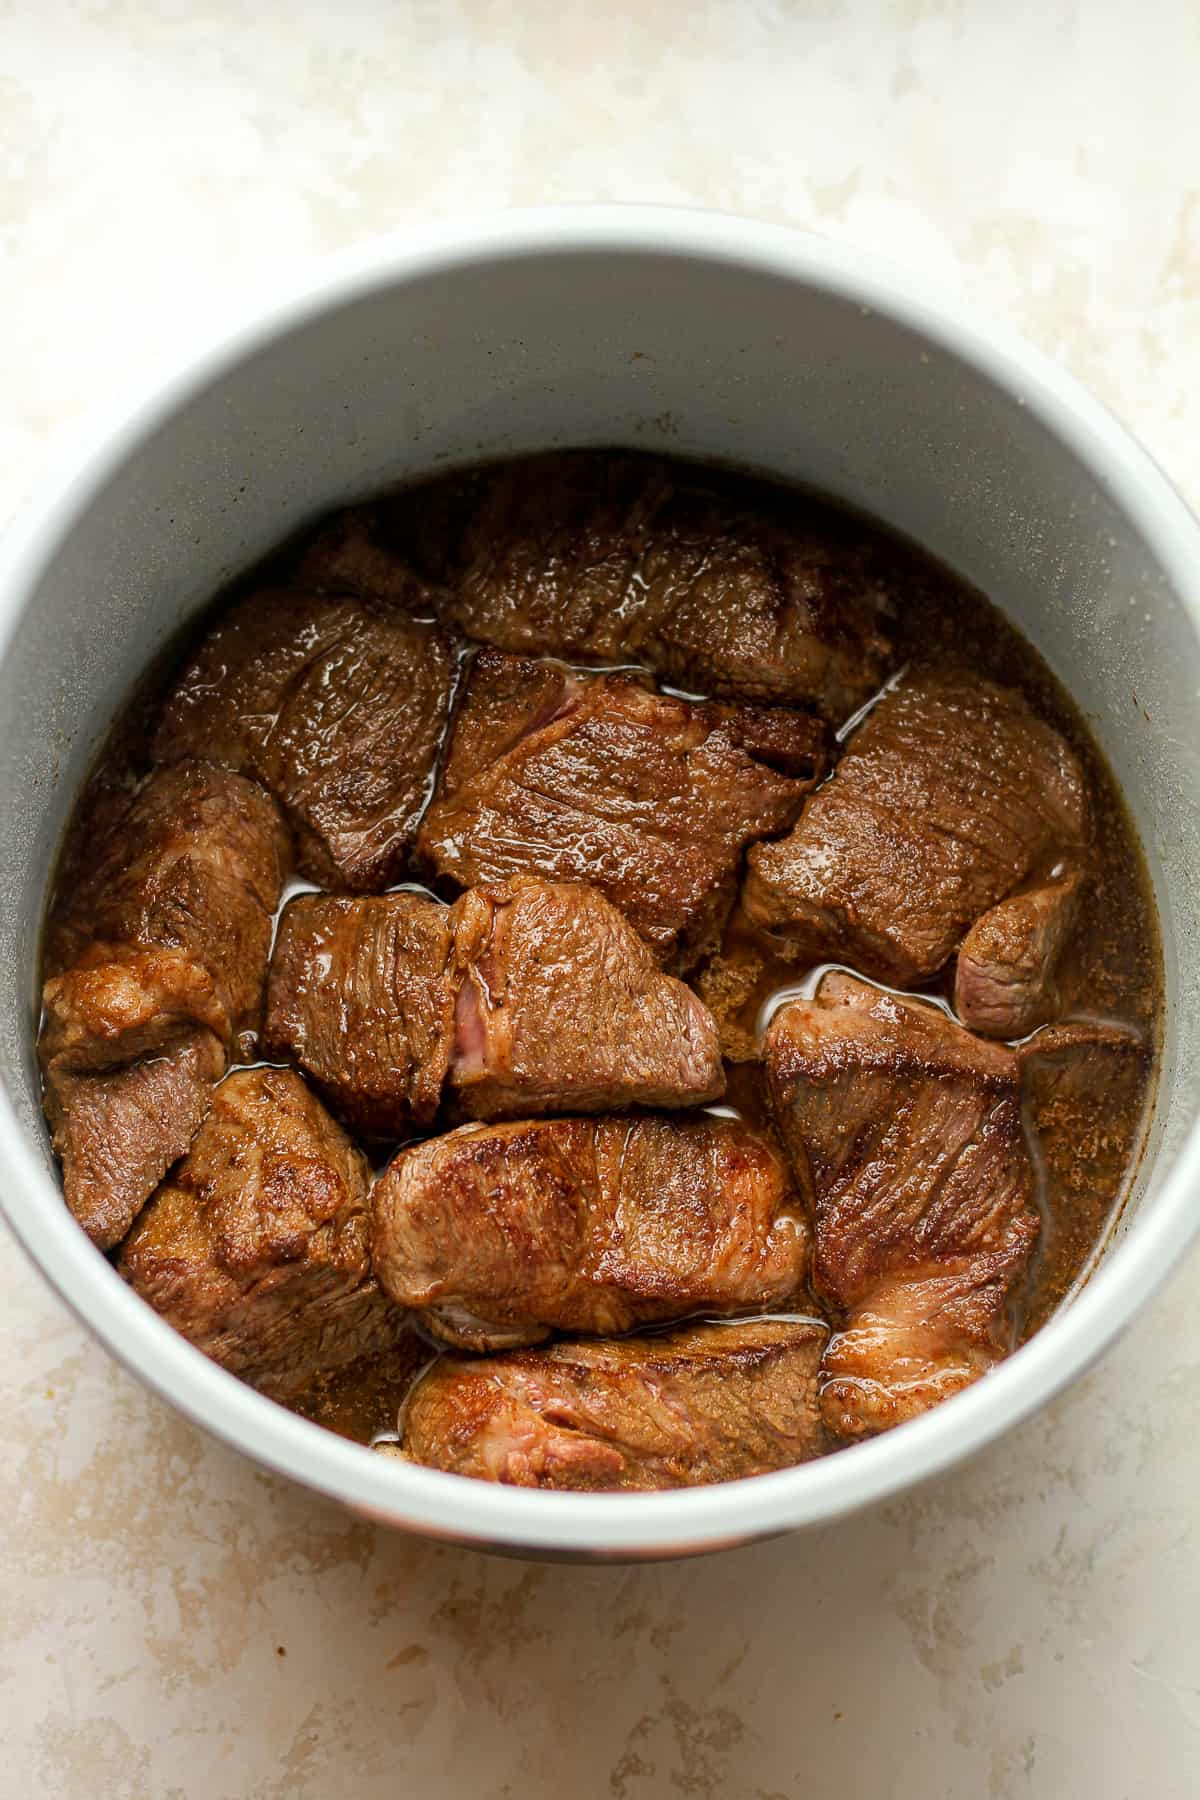 An instant pot bowl of browned chuck roast.